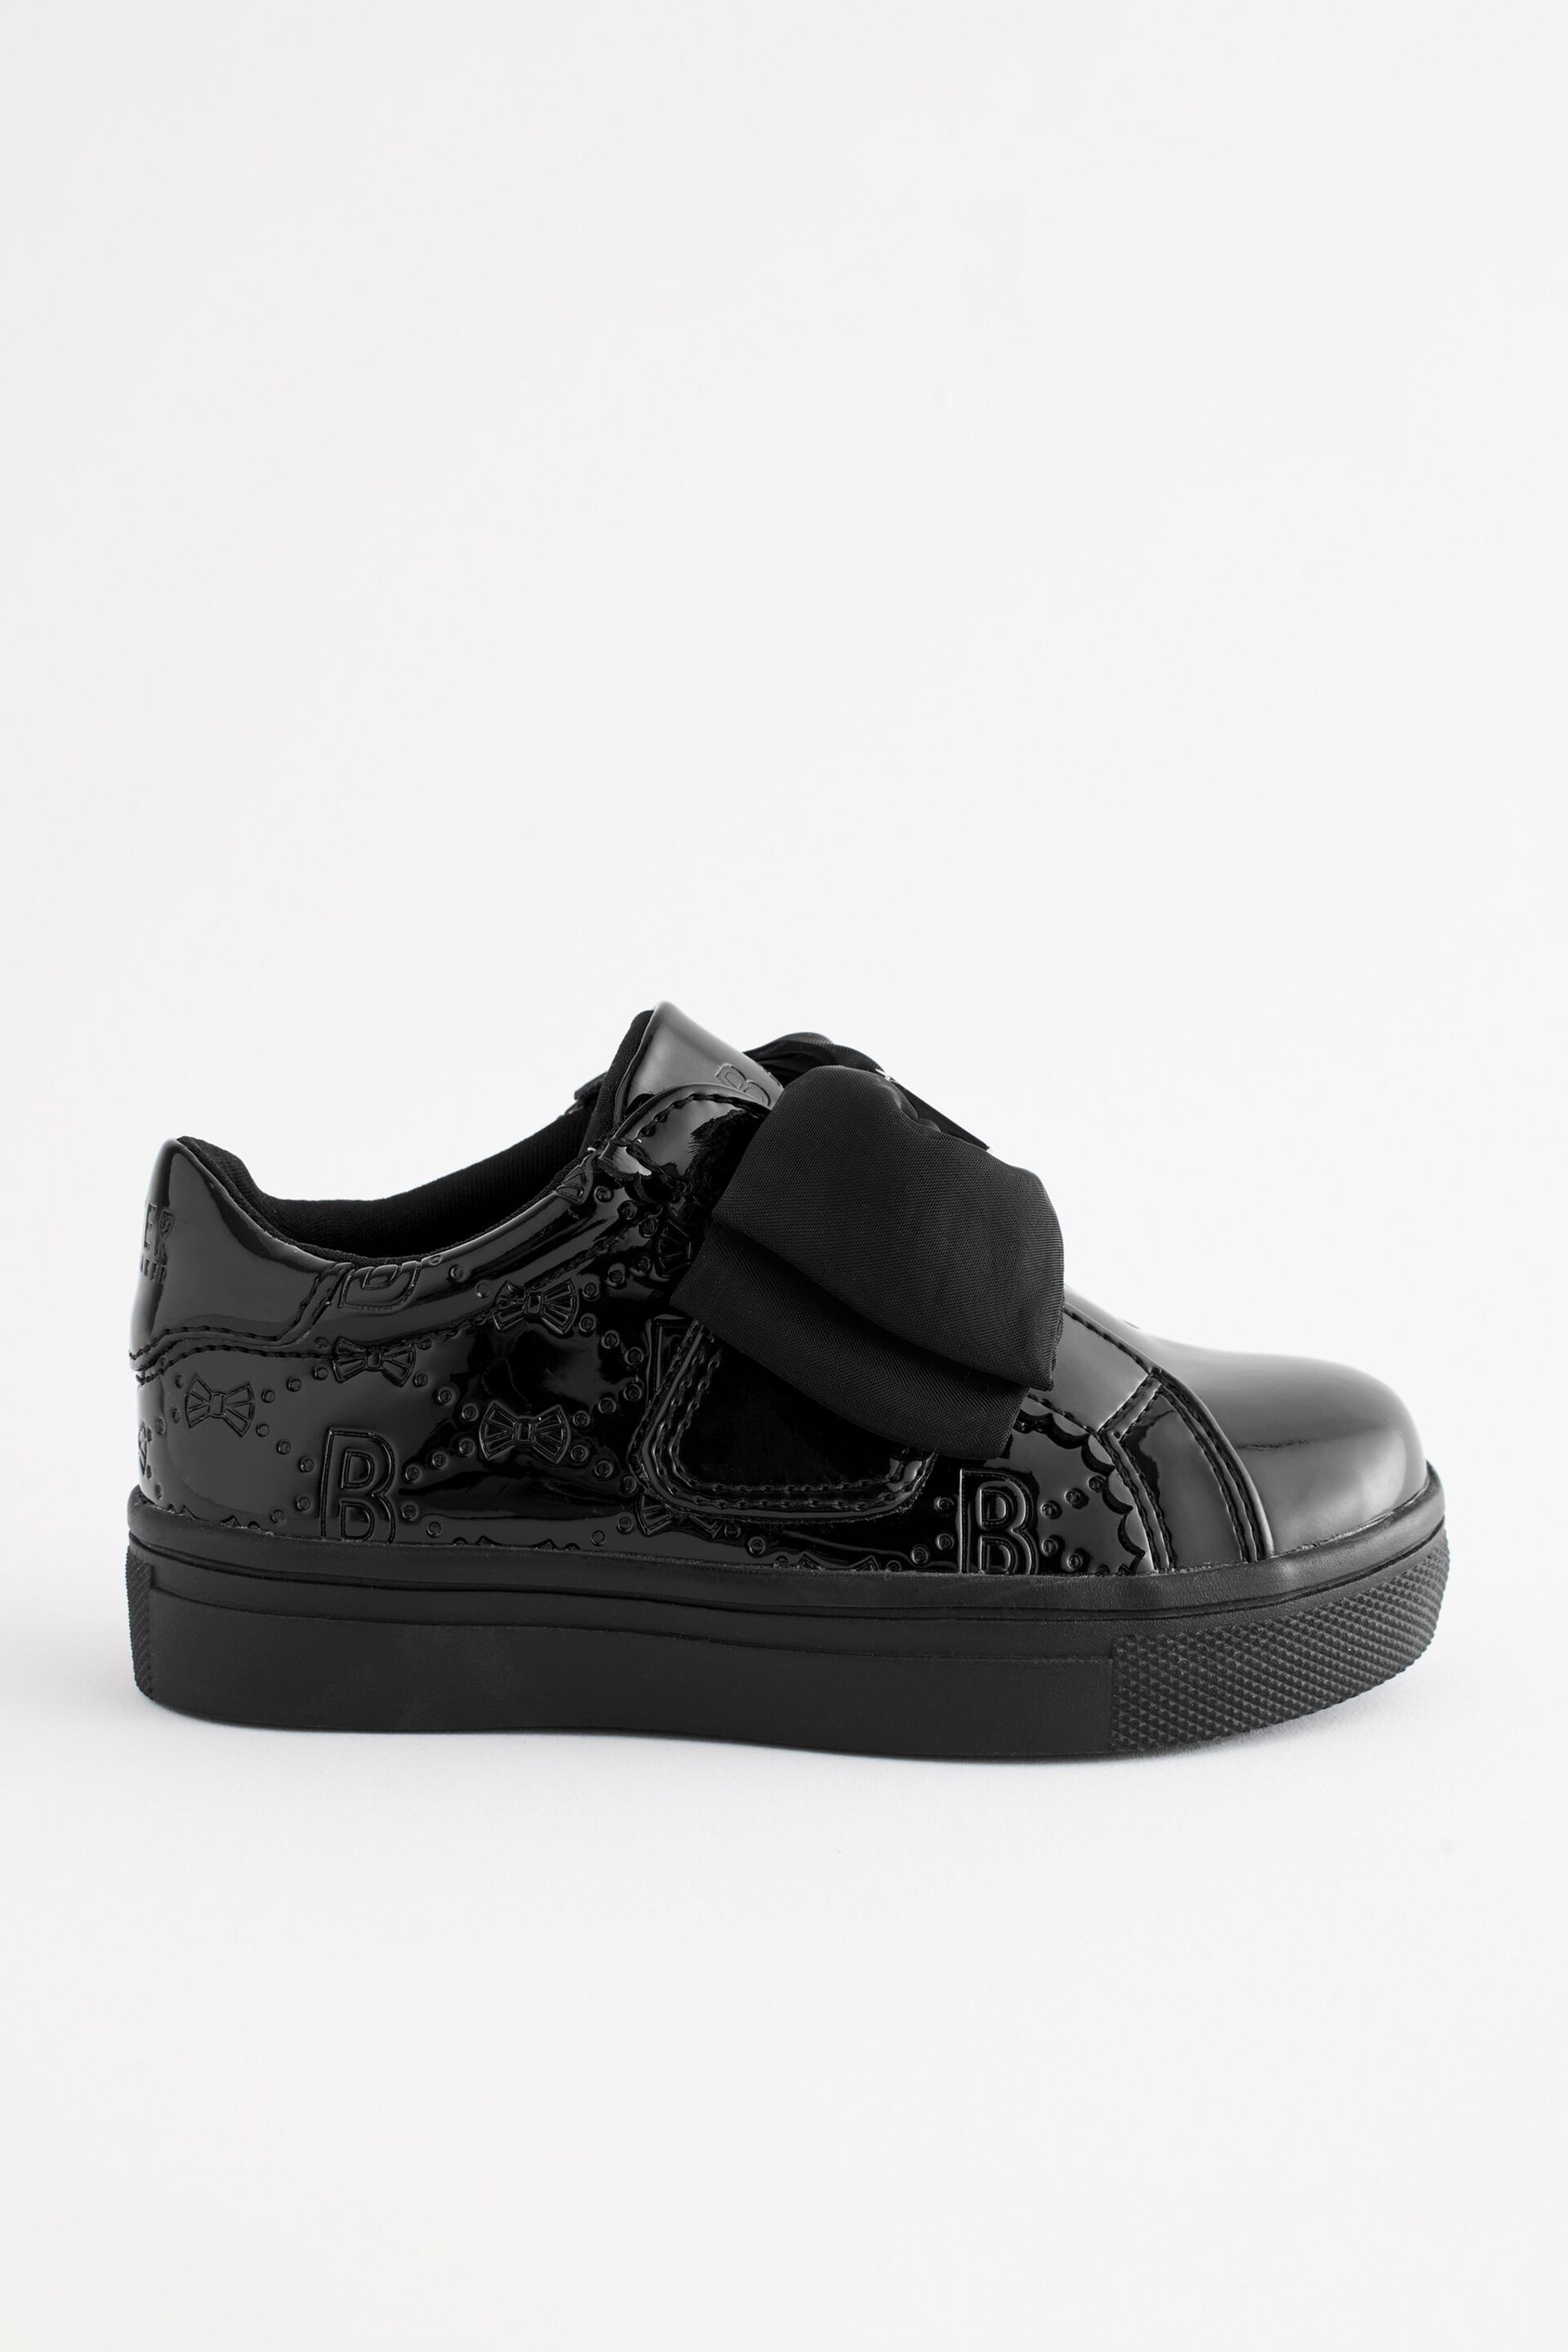 Baker by Ted Baker Girls Black Back to School Trainers with Bow - Image 2 of 6